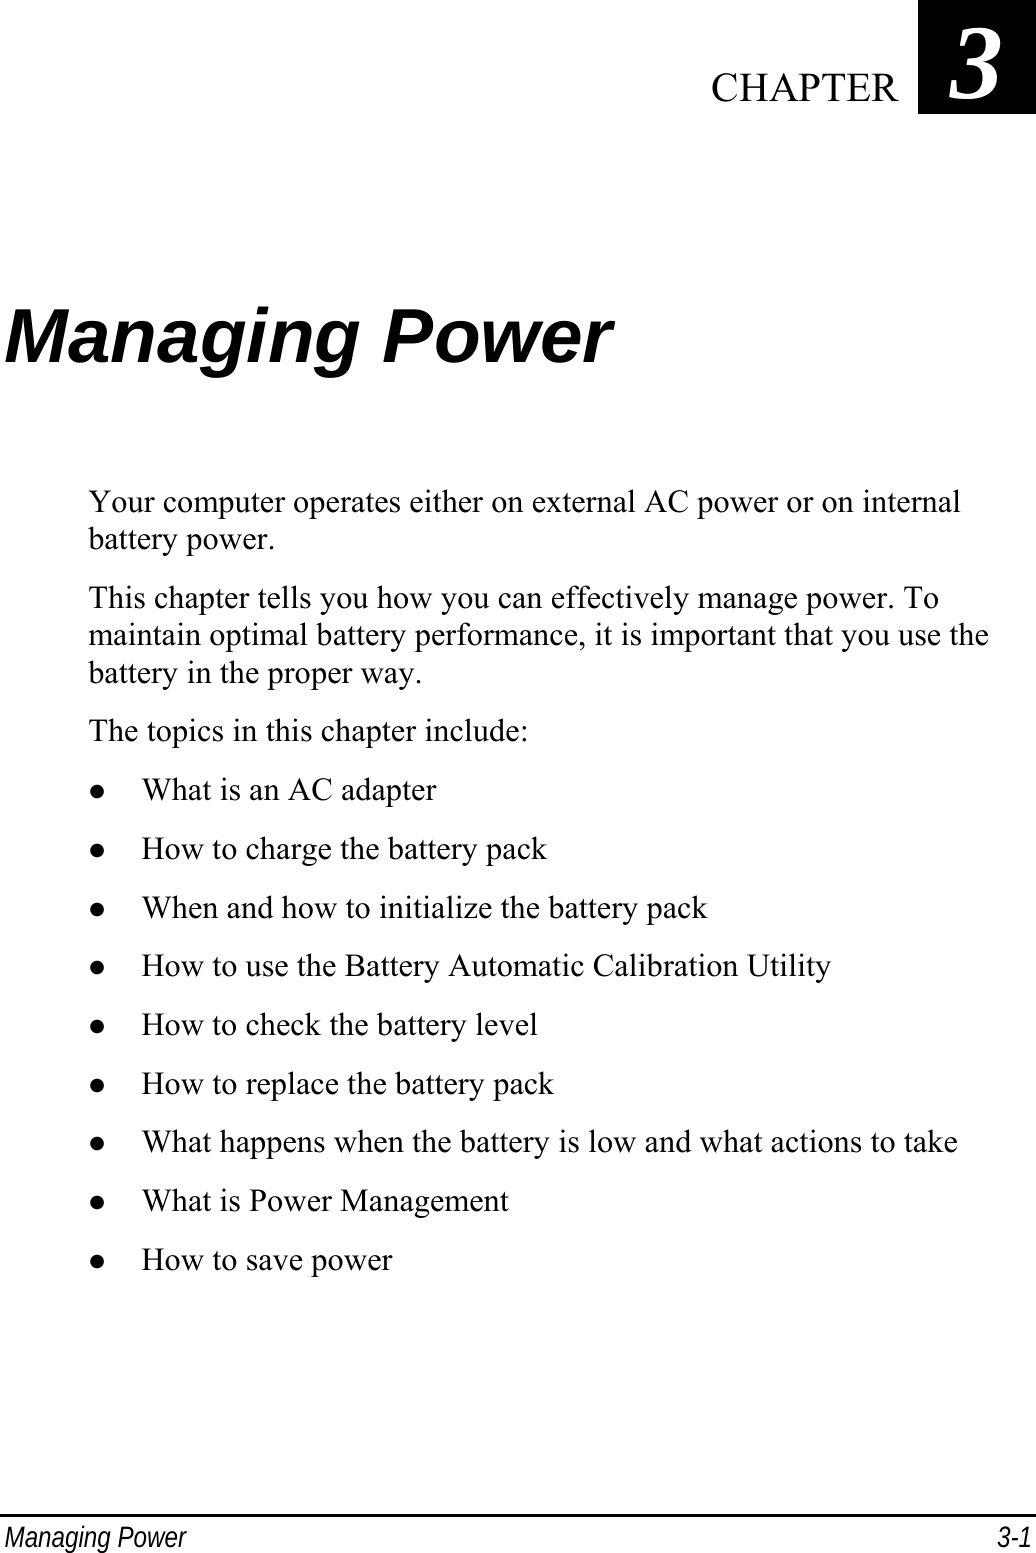  Managing Power  3-1 Chapter   3 Managing Power Your computer operates either on external AC power or on internal battery power. This chapter tells you how you can effectively manage power. To maintain optimal battery performance, it is important that you use the battery in the proper way. The topics in this chapter include: z What is an AC adapter z How to charge the battery pack z When and how to initialize the battery pack z How to use the Battery Automatic Calibration Utility z How to check the battery level z How to replace the battery pack z What happens when the battery is low and what actions to take z What is Power Management z How to save power  CHAPTER 